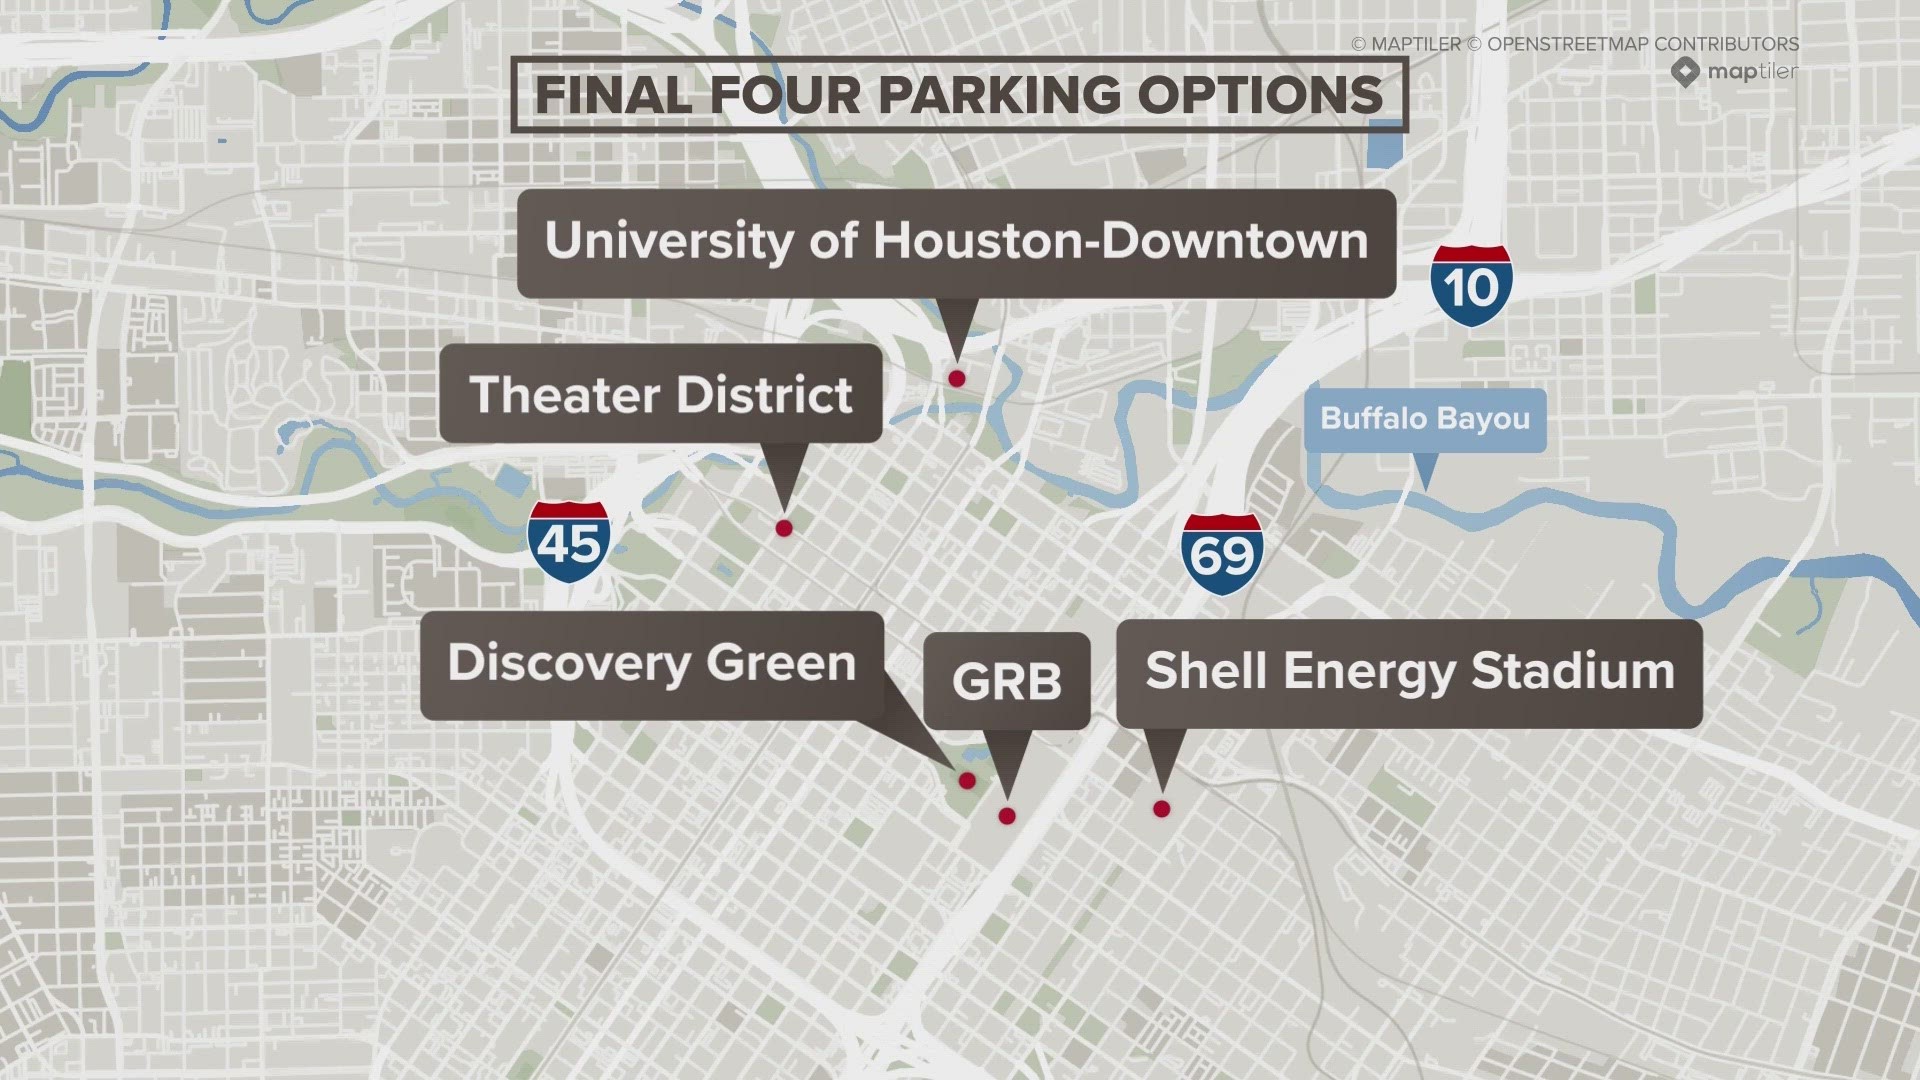 Parking is going to be a nightmare the weekend of the Final Four. Shern-Min Chow is providing tips on how to get around downtown and where to park.